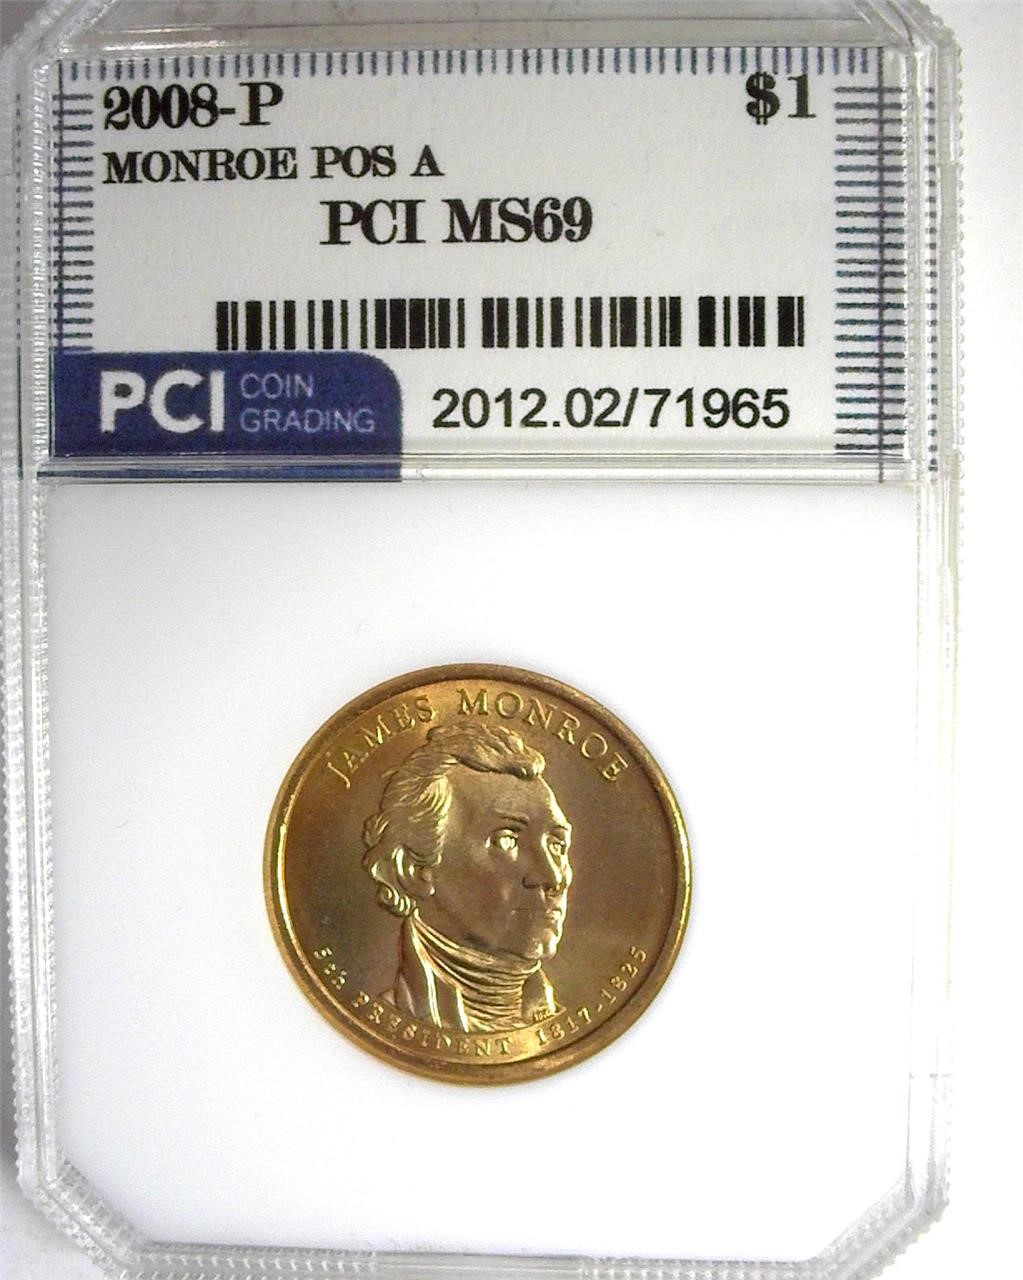 2008-P Monroe $ MS69 LISTS $260 IN 68